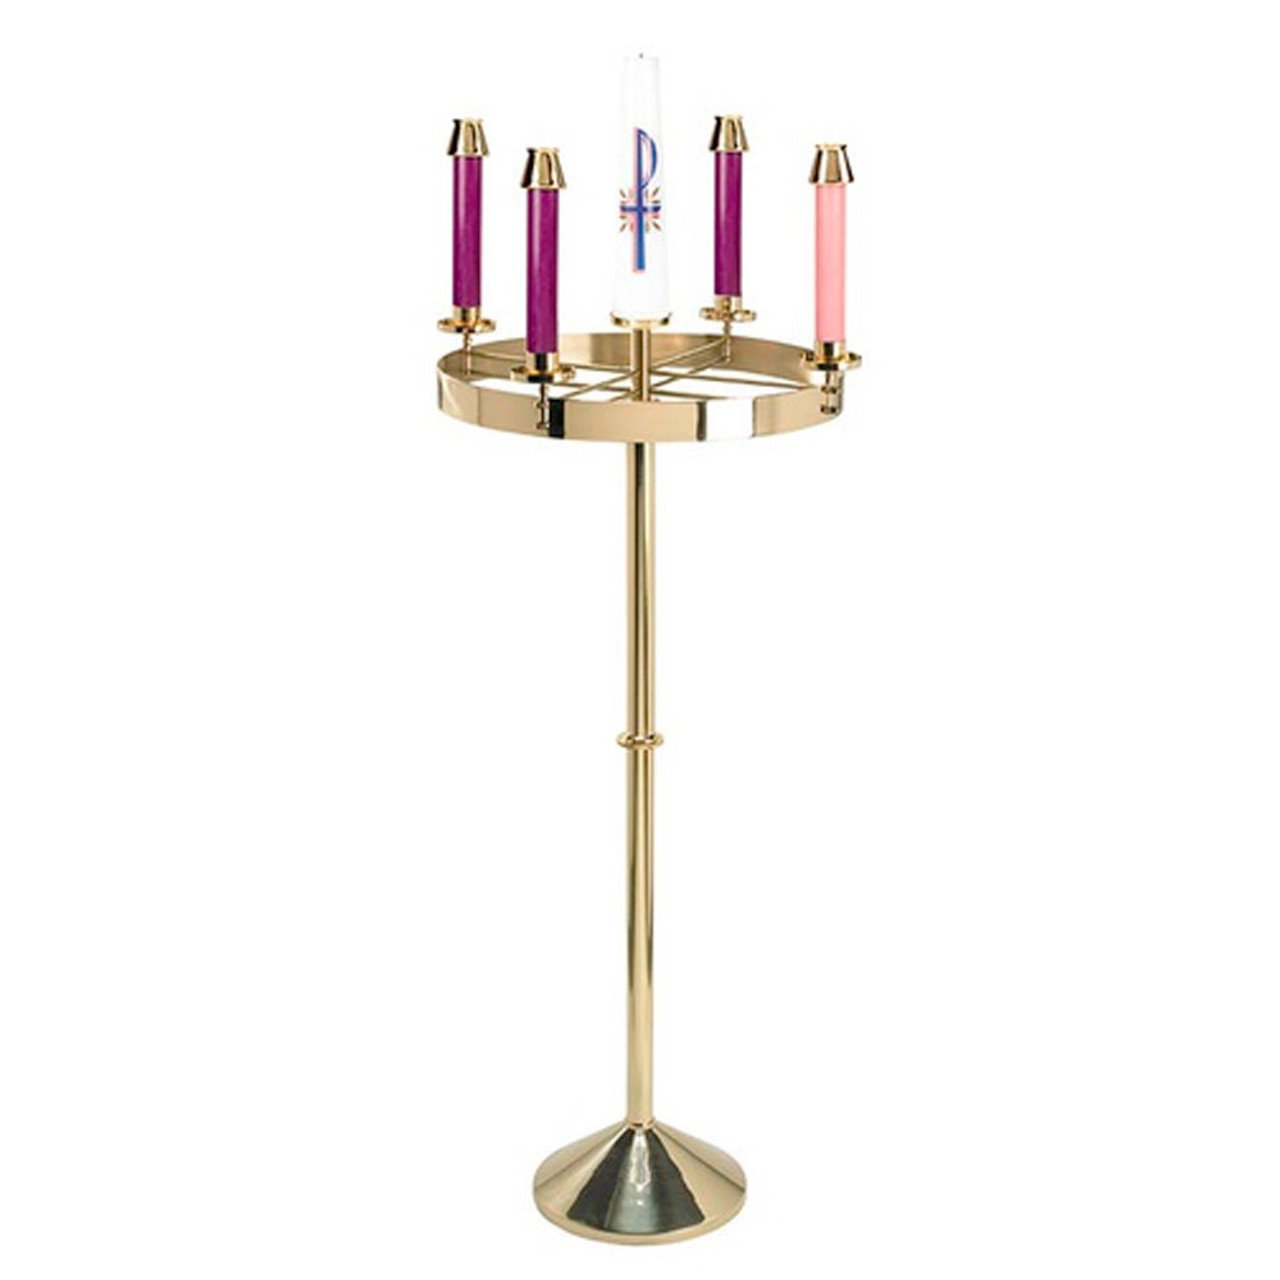 REGAL BRAND SlFAWlS ADVENT WREATH WITH ADJUSTABLE HEIGHT PASCHAL